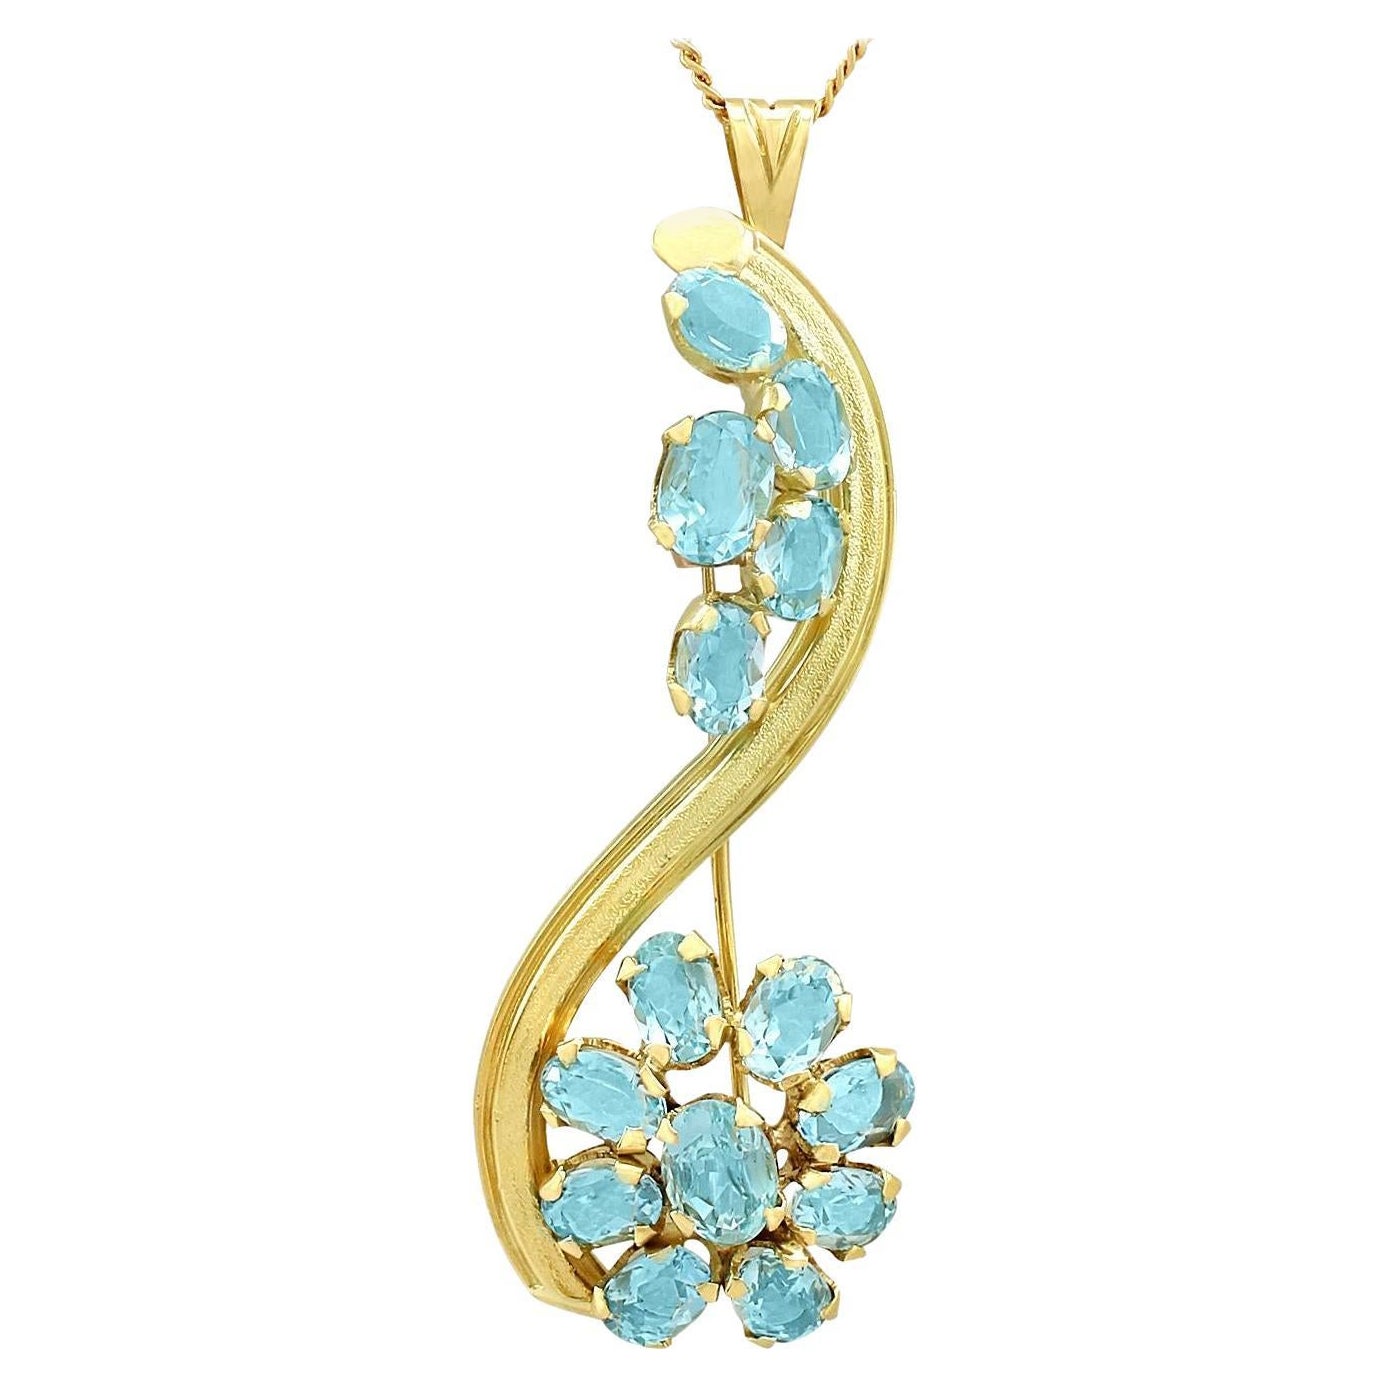 Vintage 1950s 6.05 Carat Aquamarine and Yellow Gold Pendant / Brooch For Sale